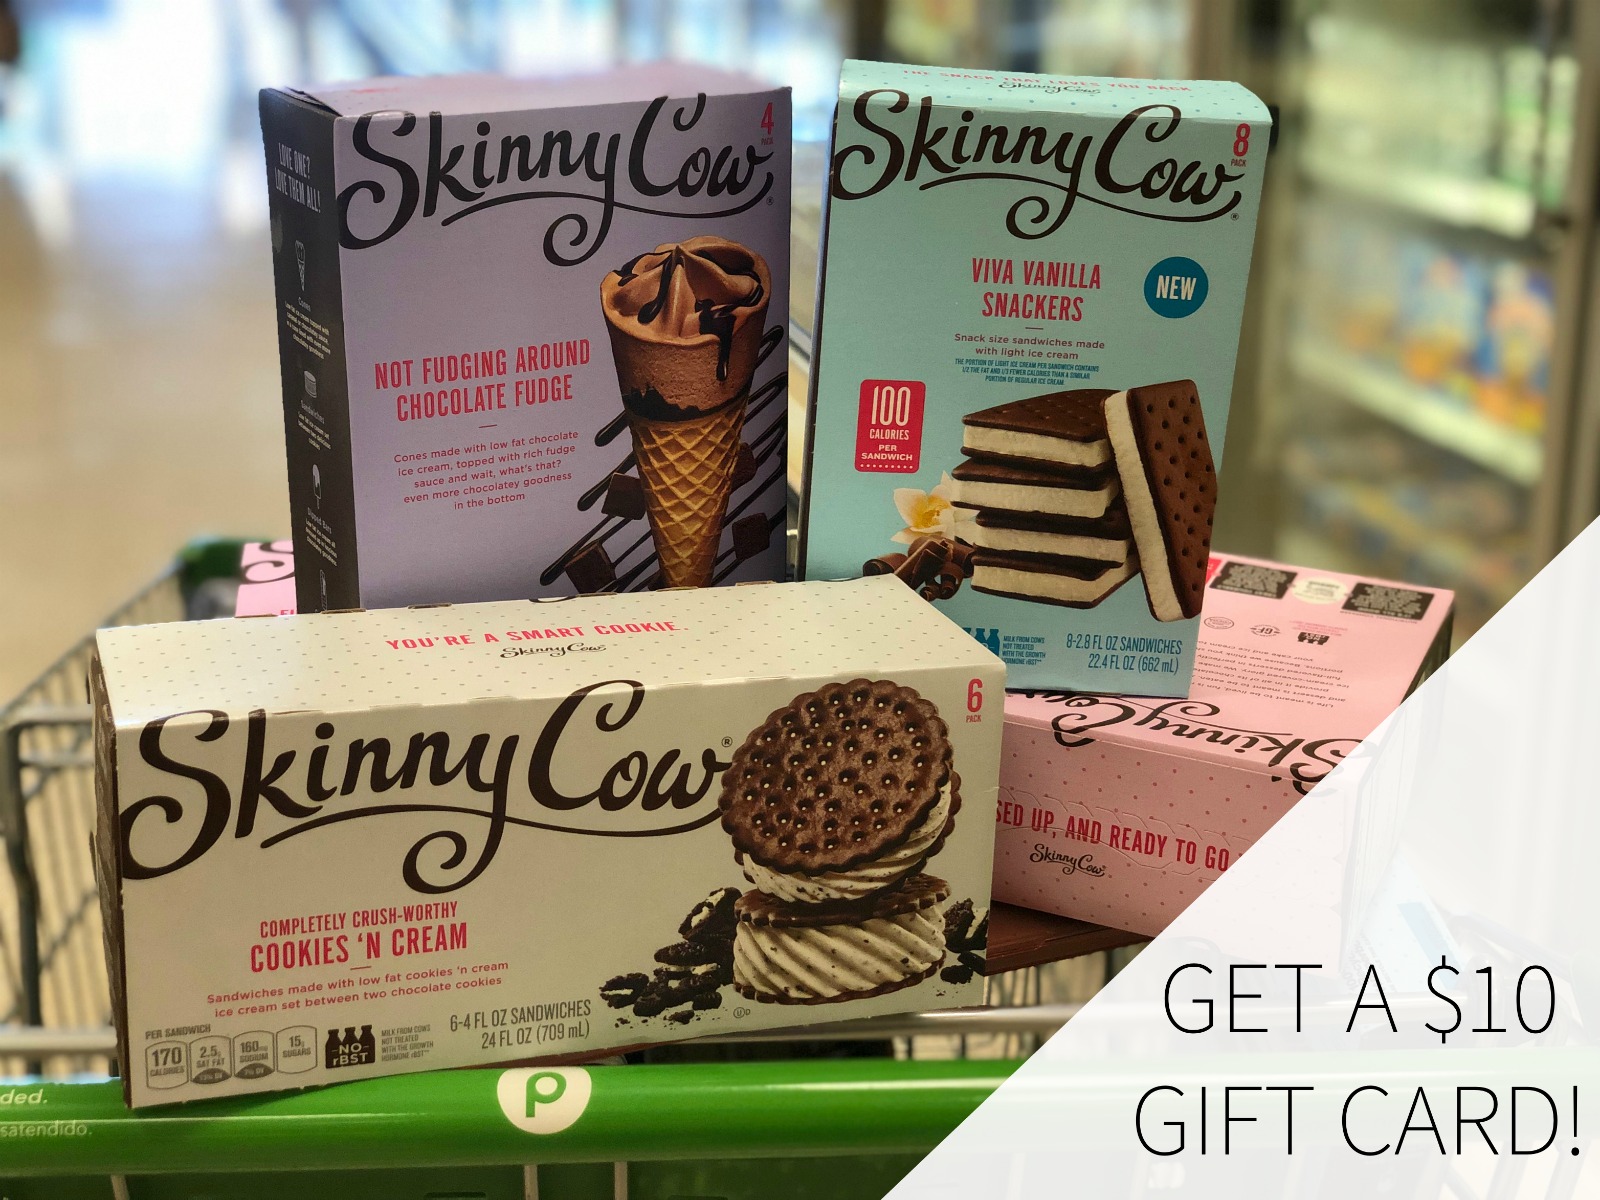 $10 Gift Card With The Skinny Cow Rewards Program – Treat Yourself This Holiday Season